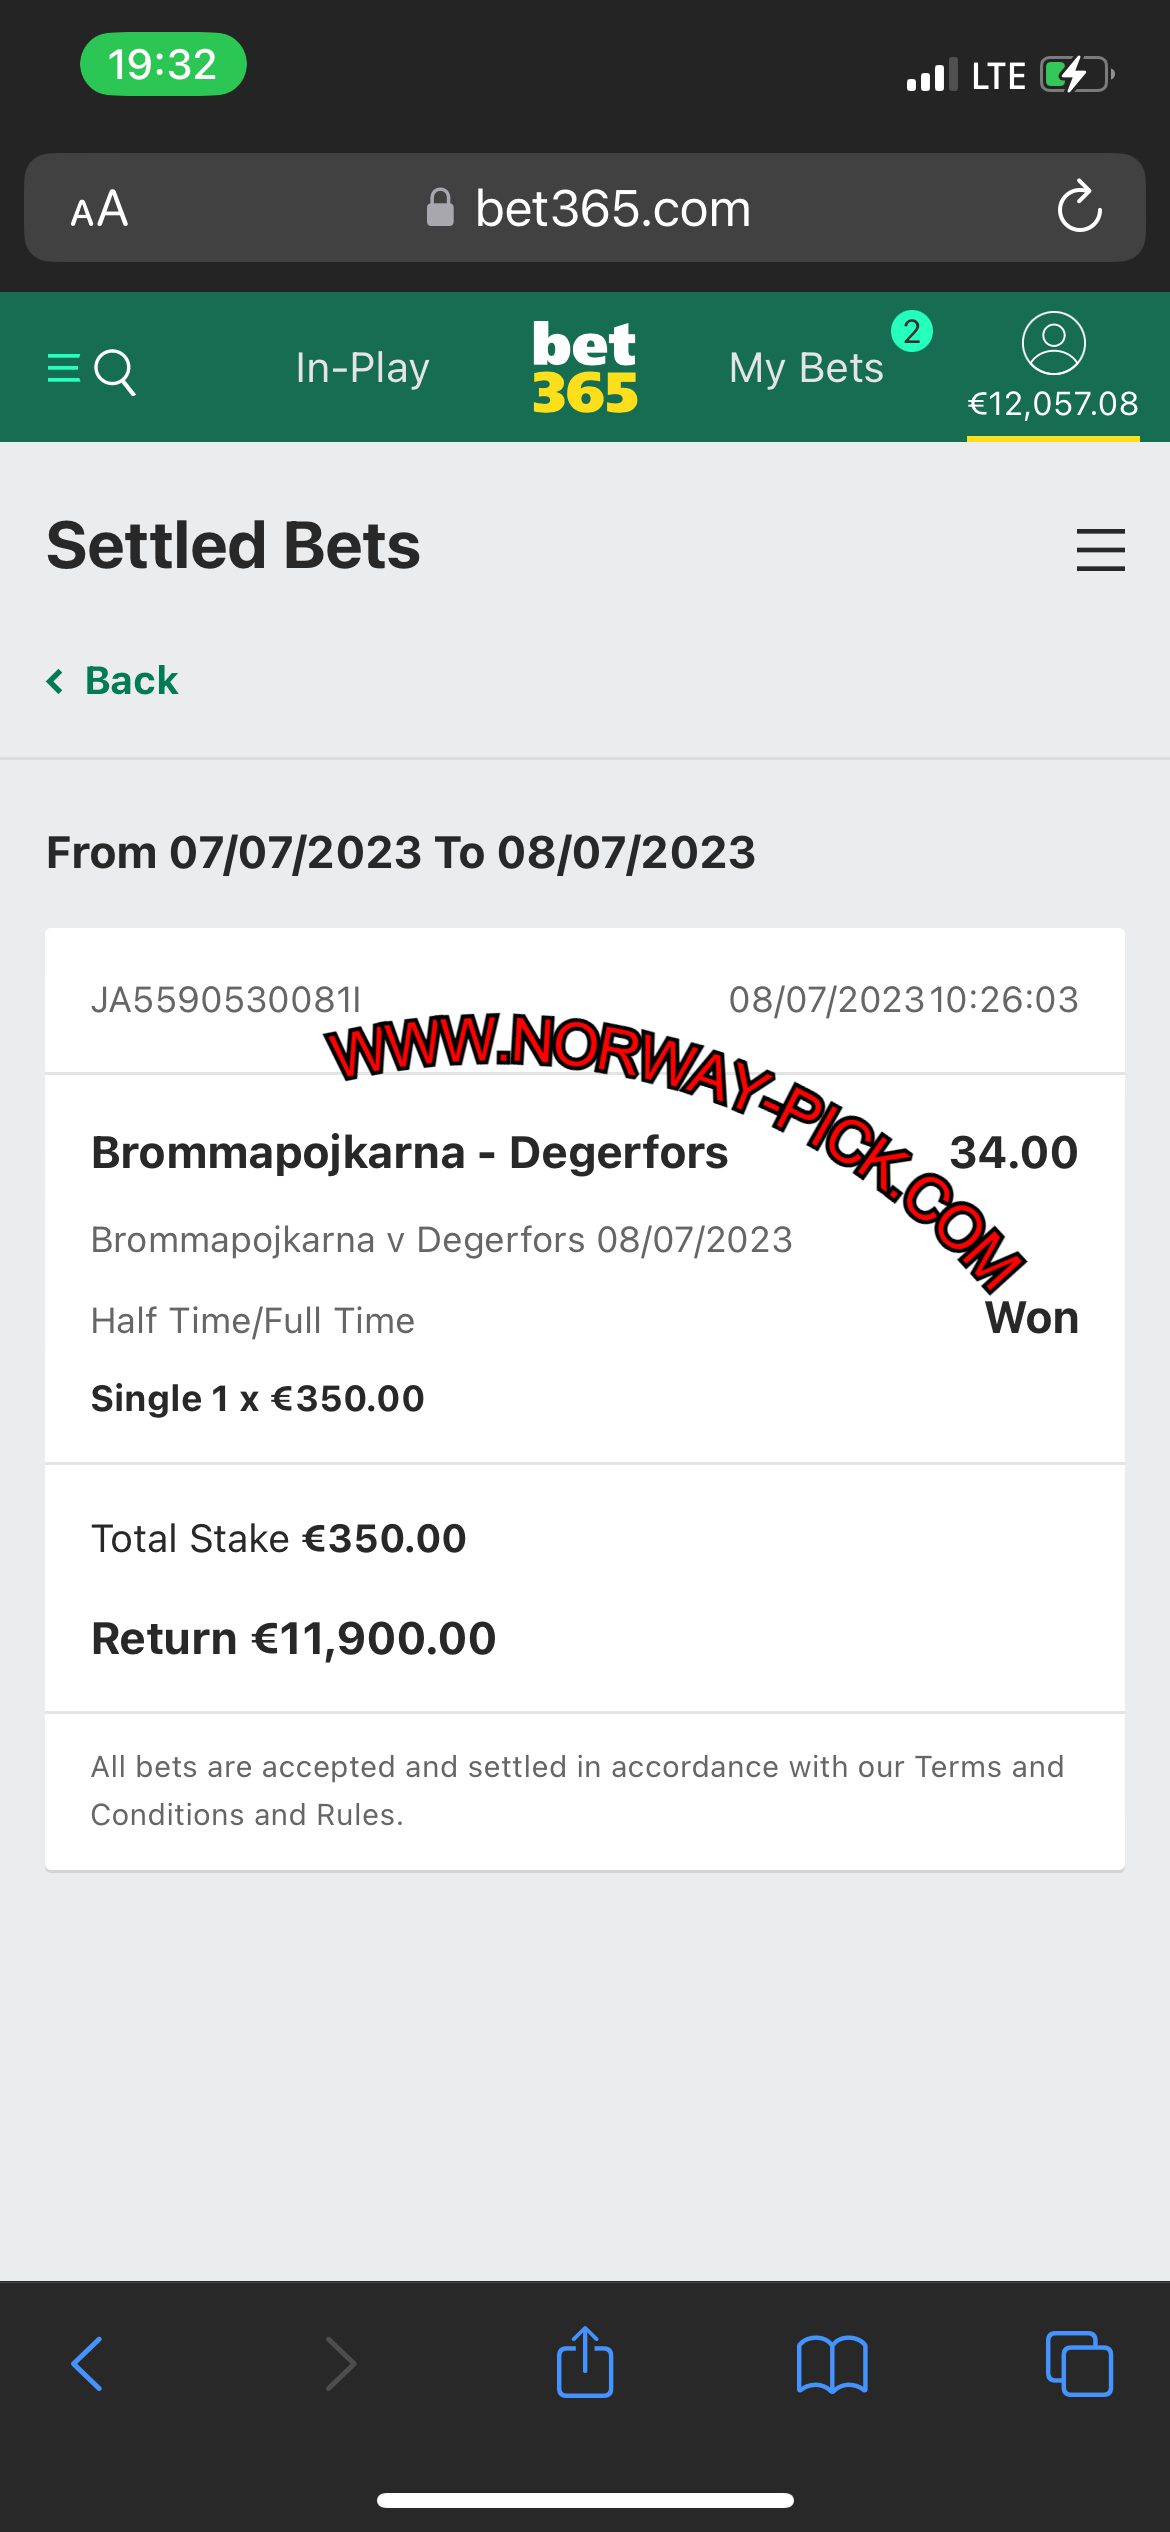 NORWAY BETTING TIPS - FIXED MATCHES 1X2